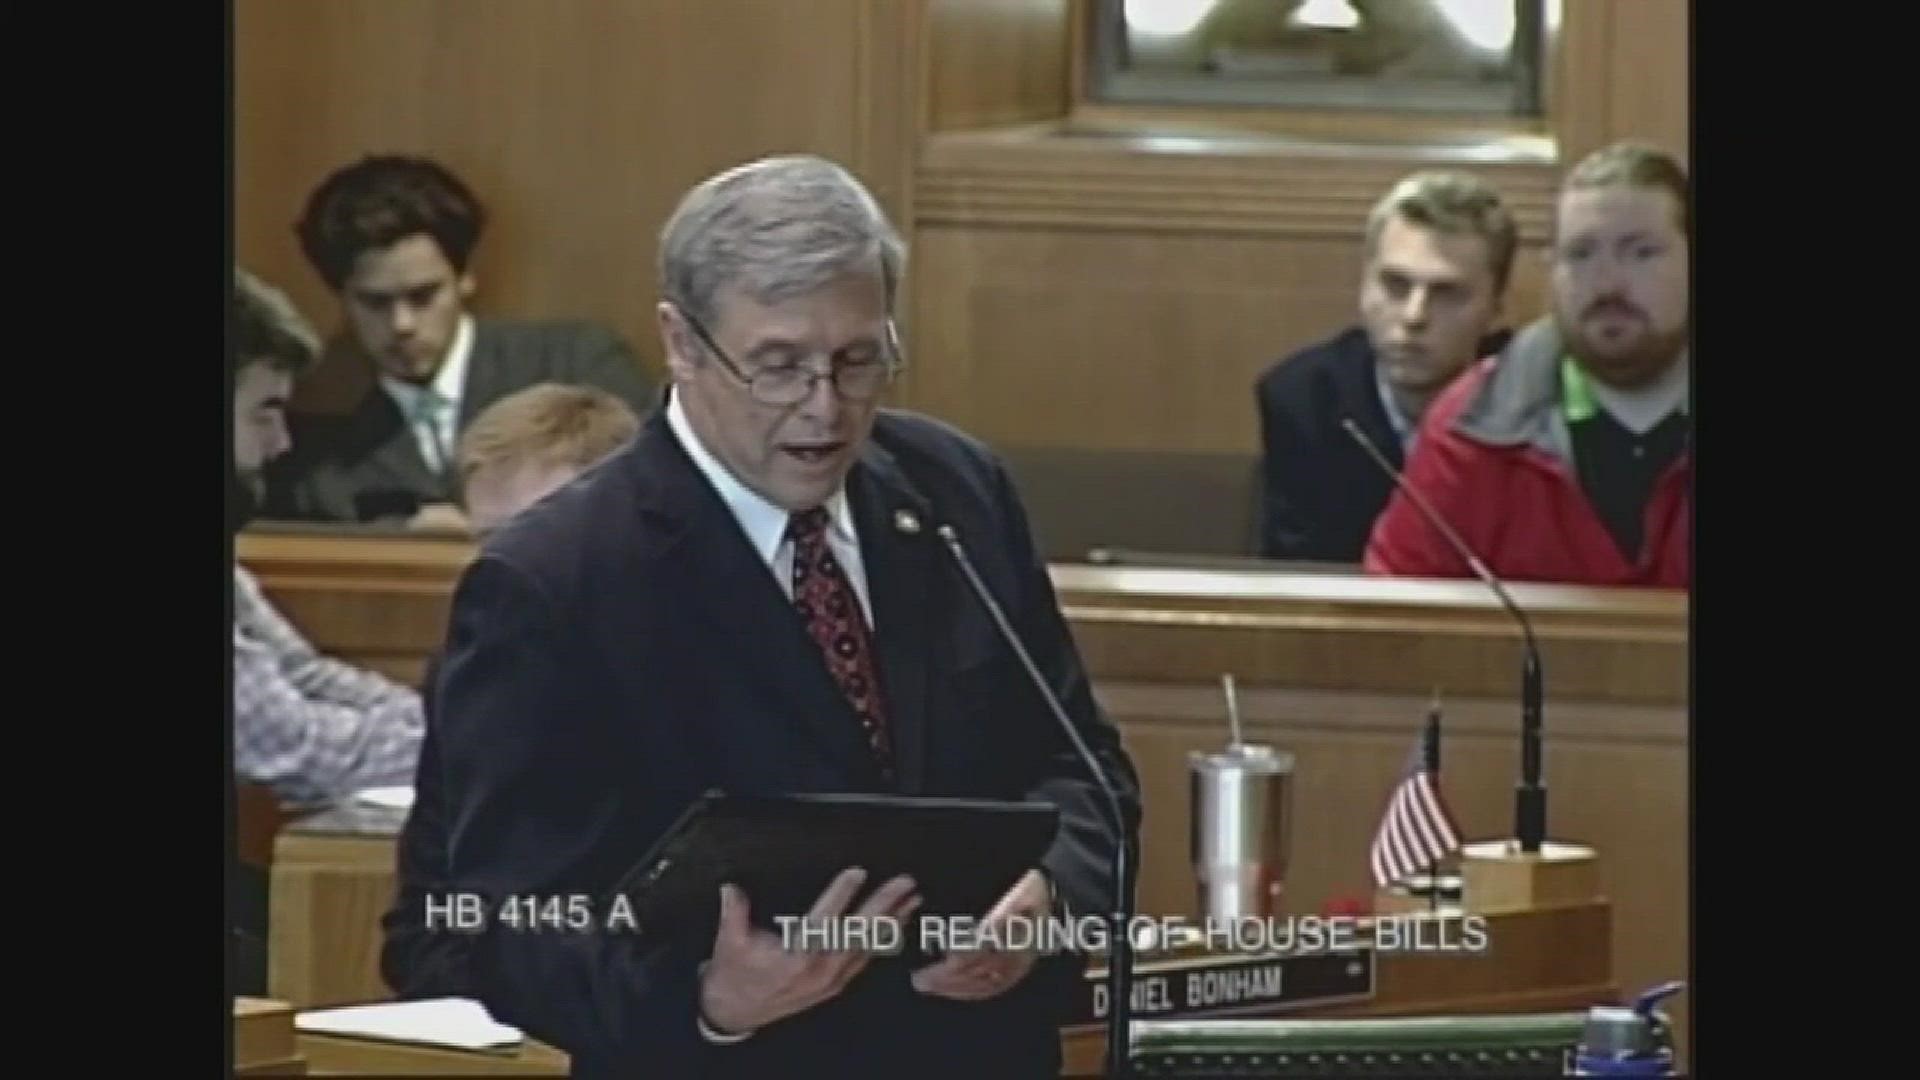 Oregon Rep. Rich Vial (R-Hillsboro) votes yes on a bill to expand a gun purchase ban to include abusers, despite feeling pressure from many in his party to vote against it.